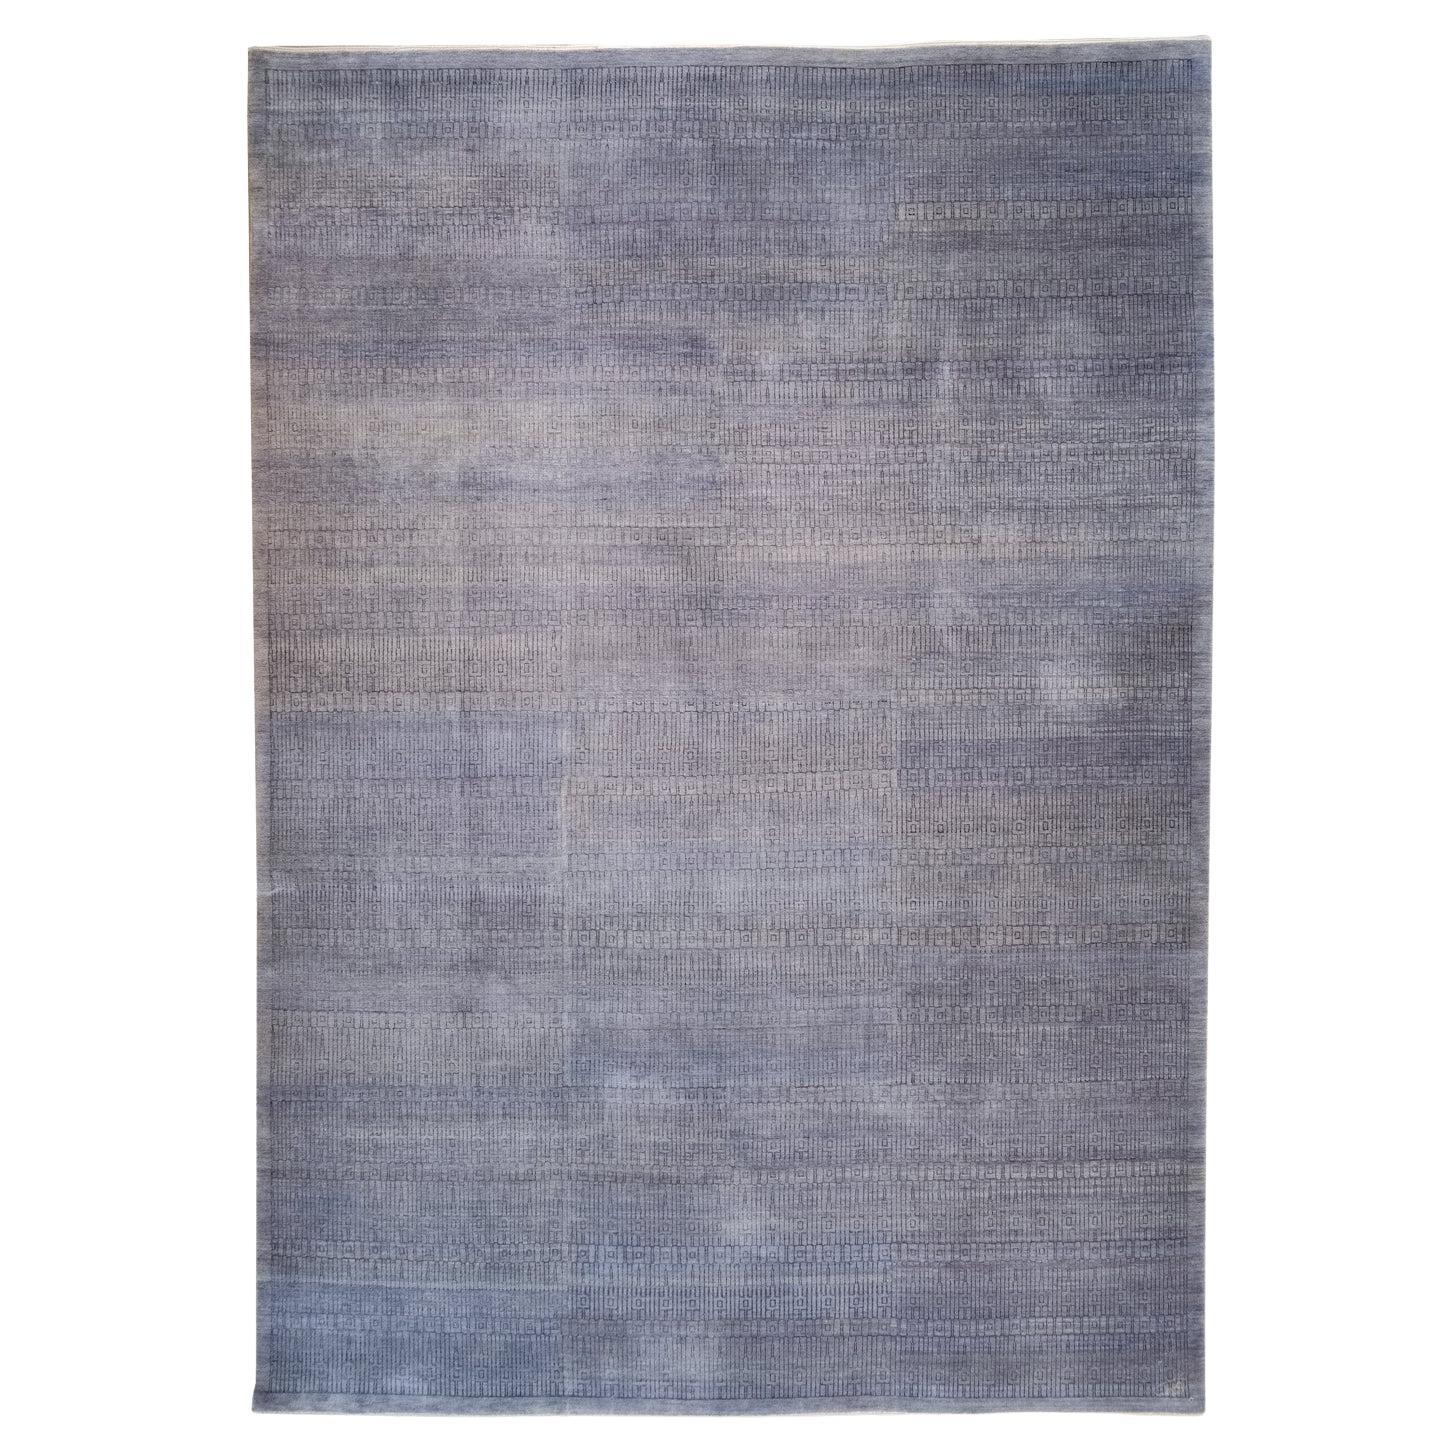 Orley Shabahang Signature “Excelsior” Gray Modern Architectural Carpet